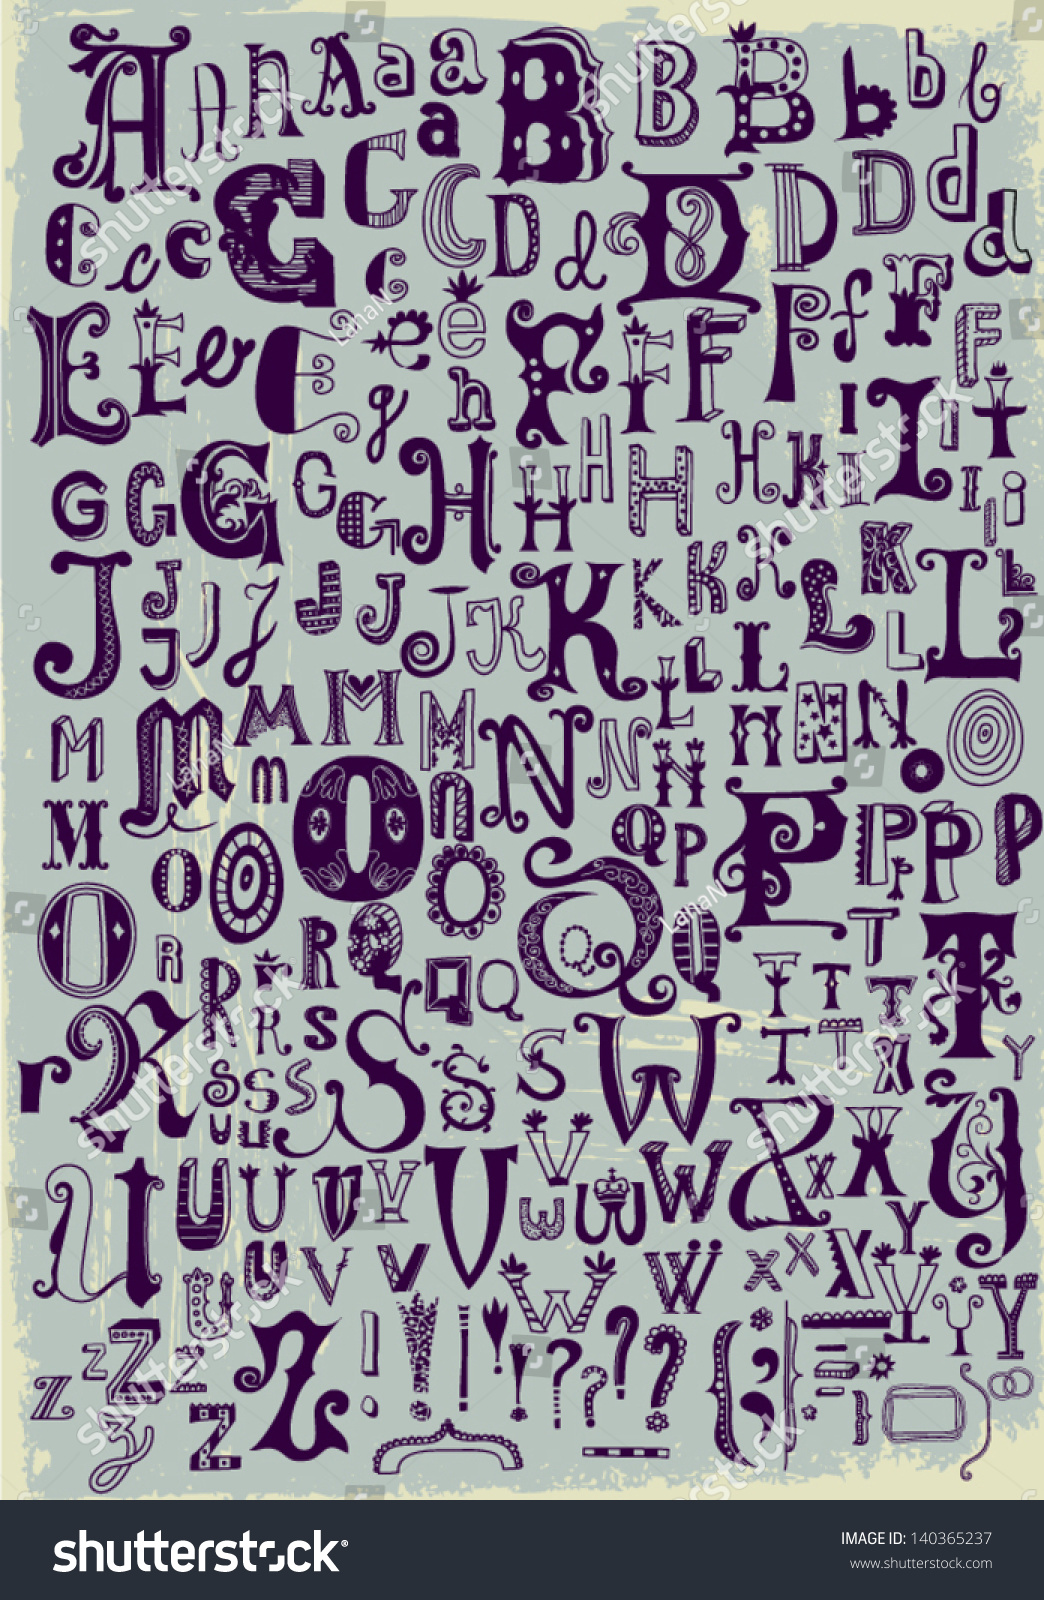 Whimsical Hand Drawn Alphabet Letters With Most Common Keystrokes Question Marks Exclamation 4334